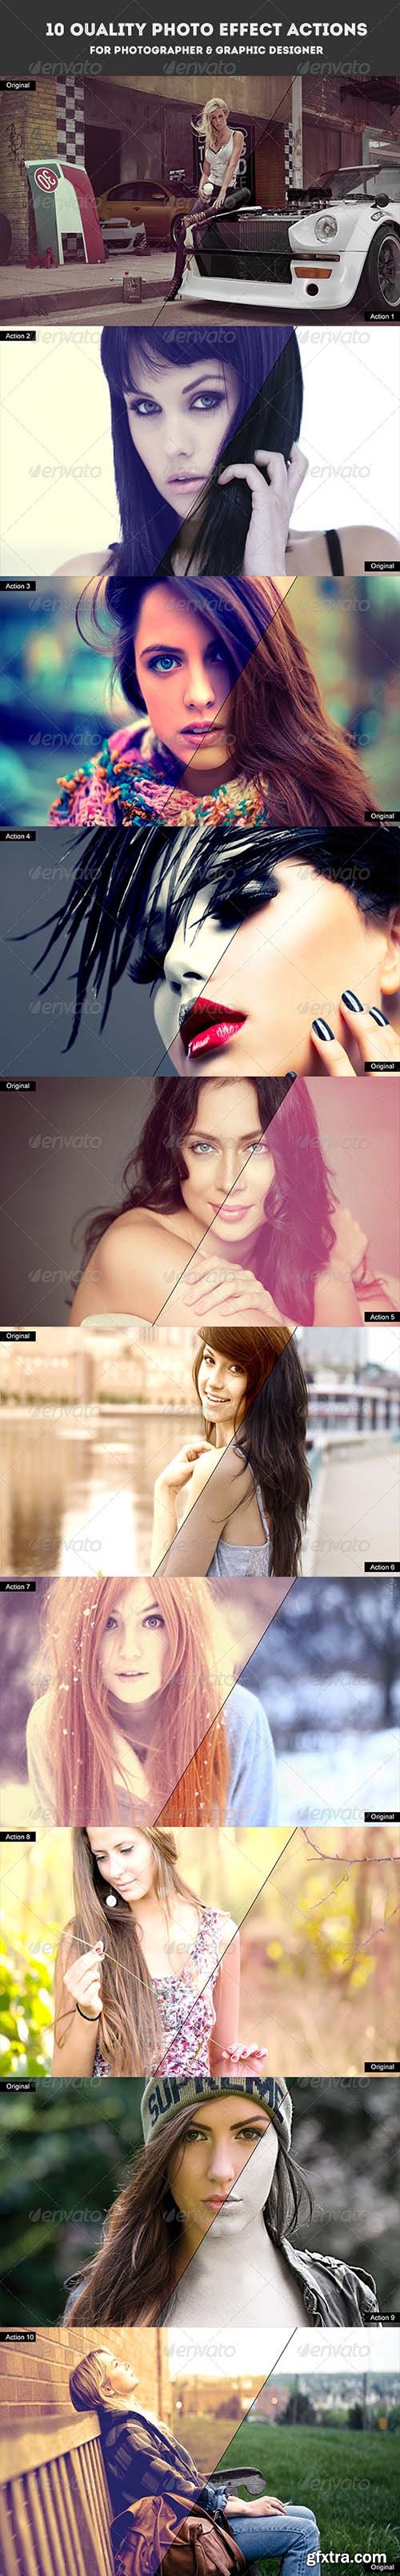 Graphicriver 10 Quality Photo Effect Actions Photoshop 7226406